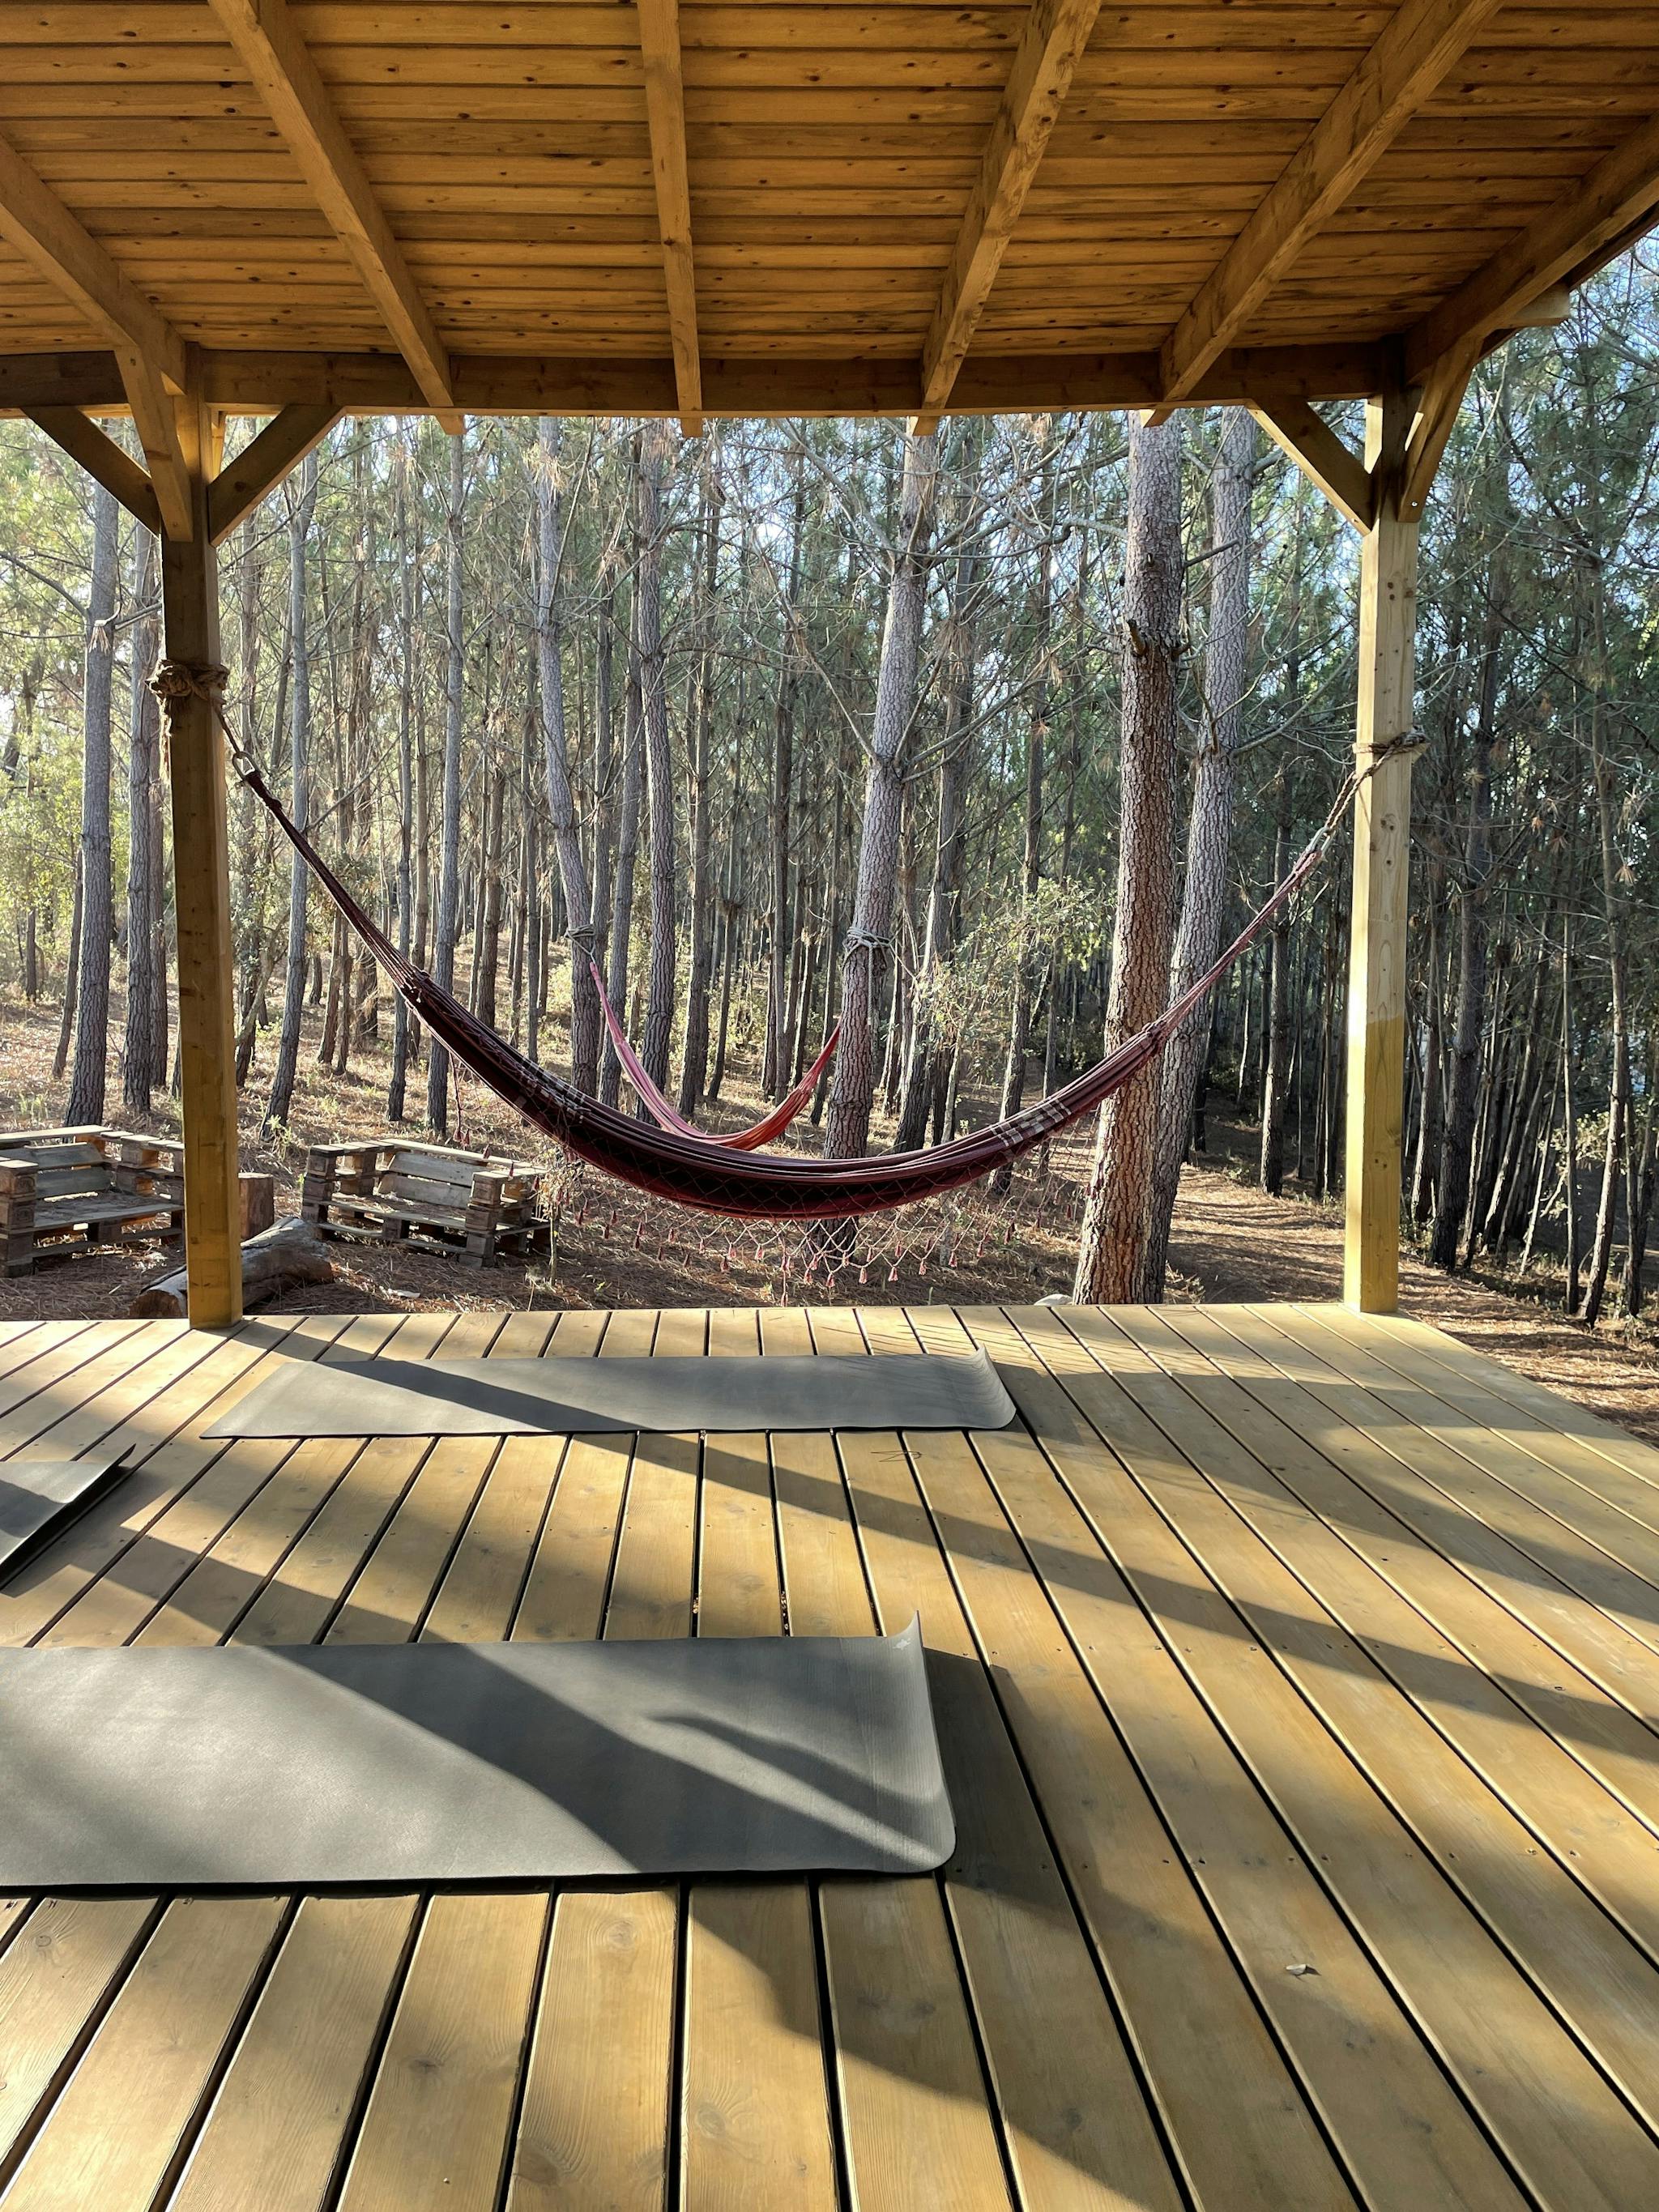 An open air yoga shala in the woods in Portugal sits empty in afternoon sunlight streaking through tres, with black yoga mats rolled out waiting for students. Two red hammocks are hanging in the distance.